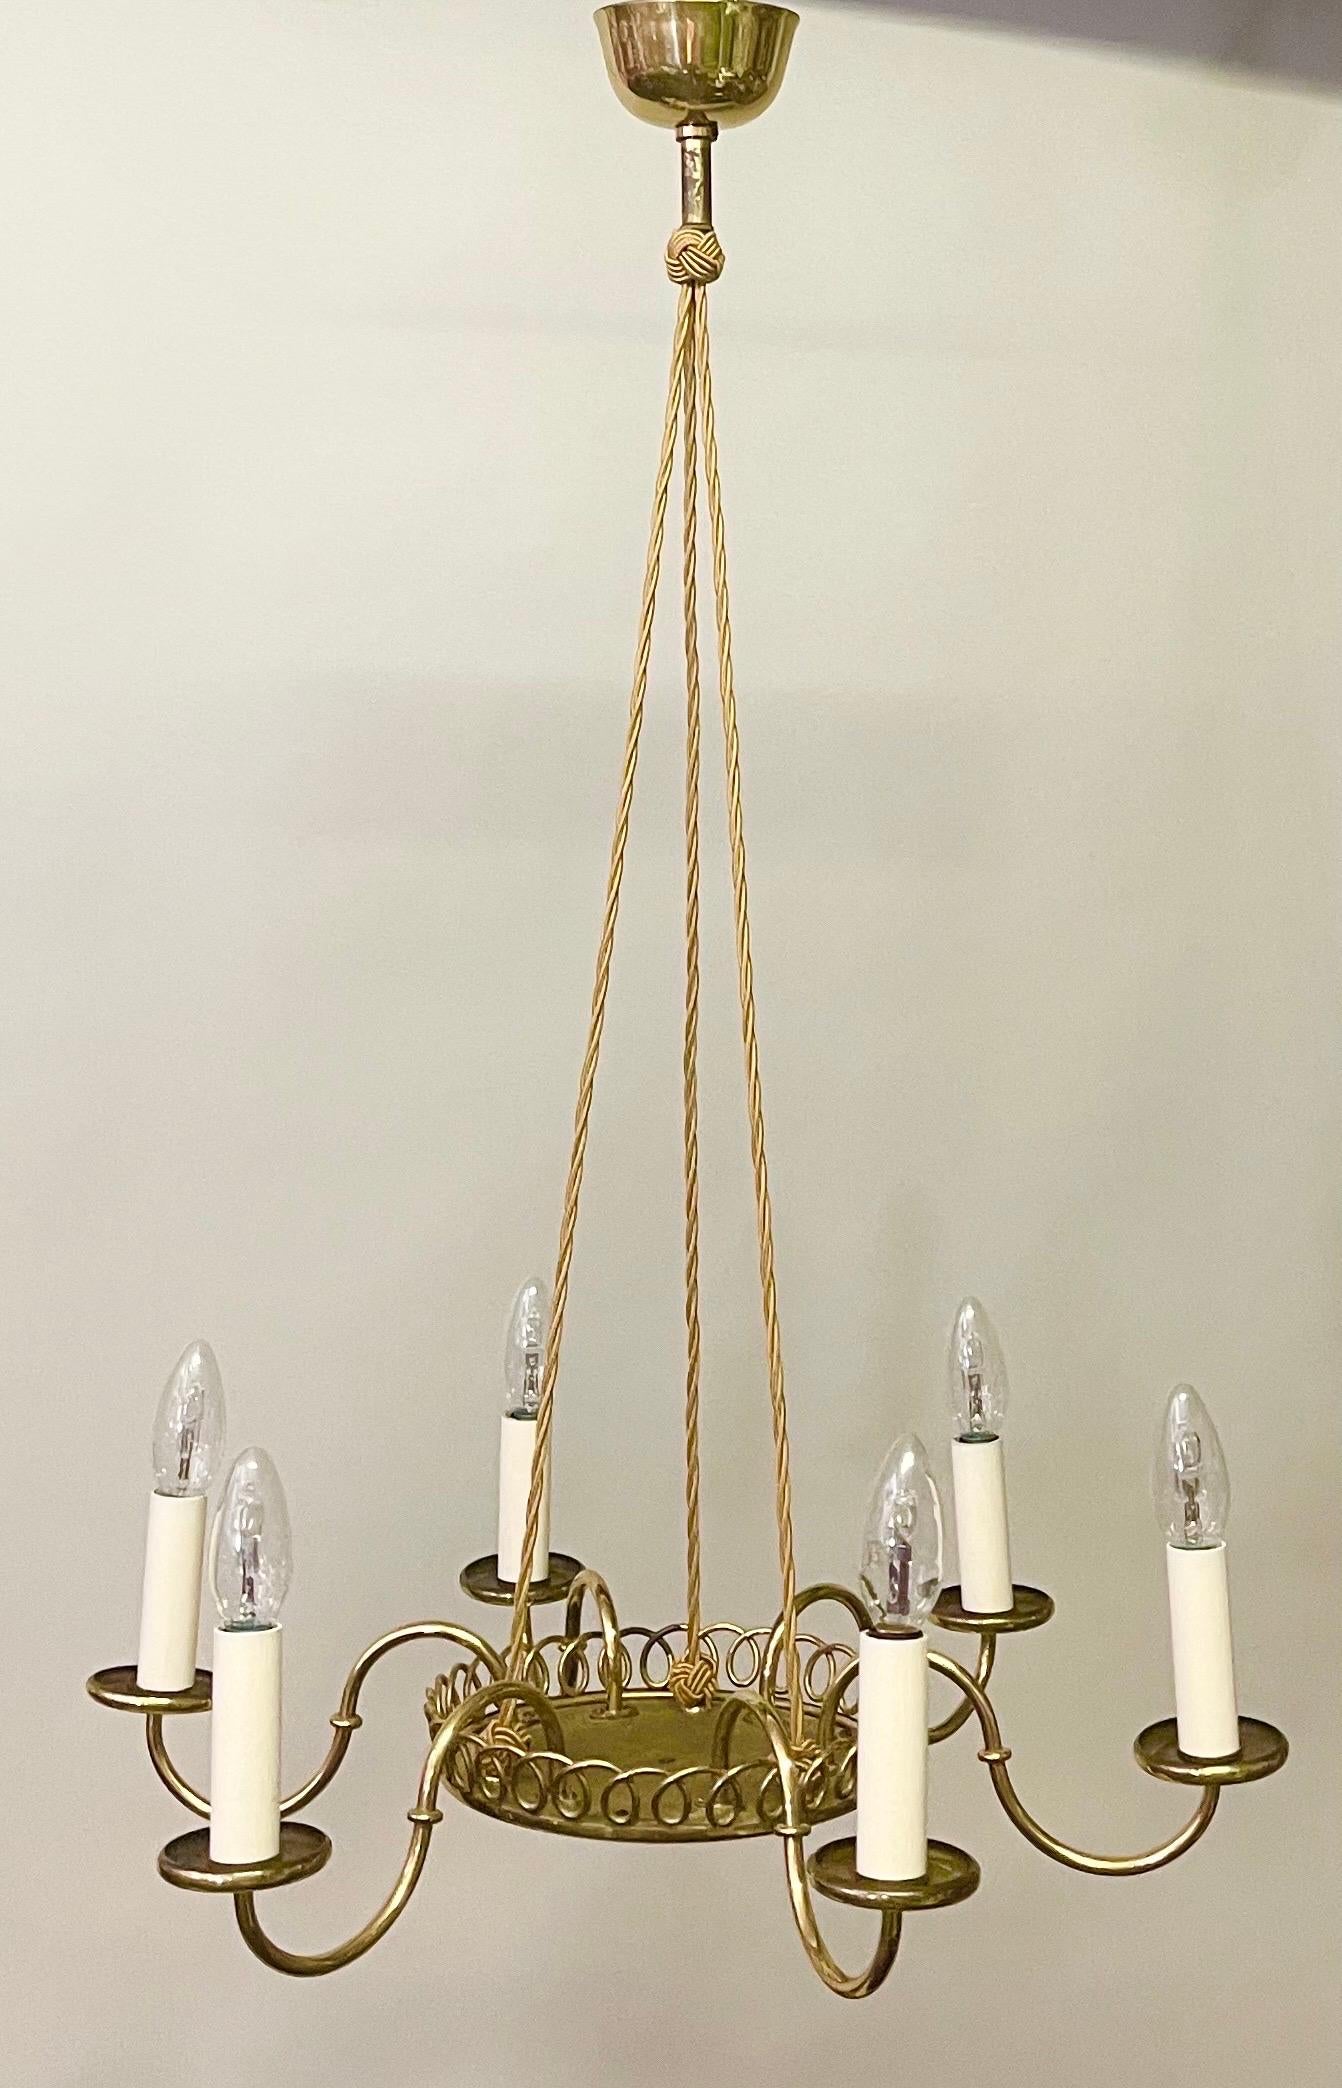 Rare charming mid - century brass six -arms chandelier by Josef Frank,  circa 1950s.

Socket: 6 x e14 for standard screw bulbs.

Condition: new wiring, fully restored.
